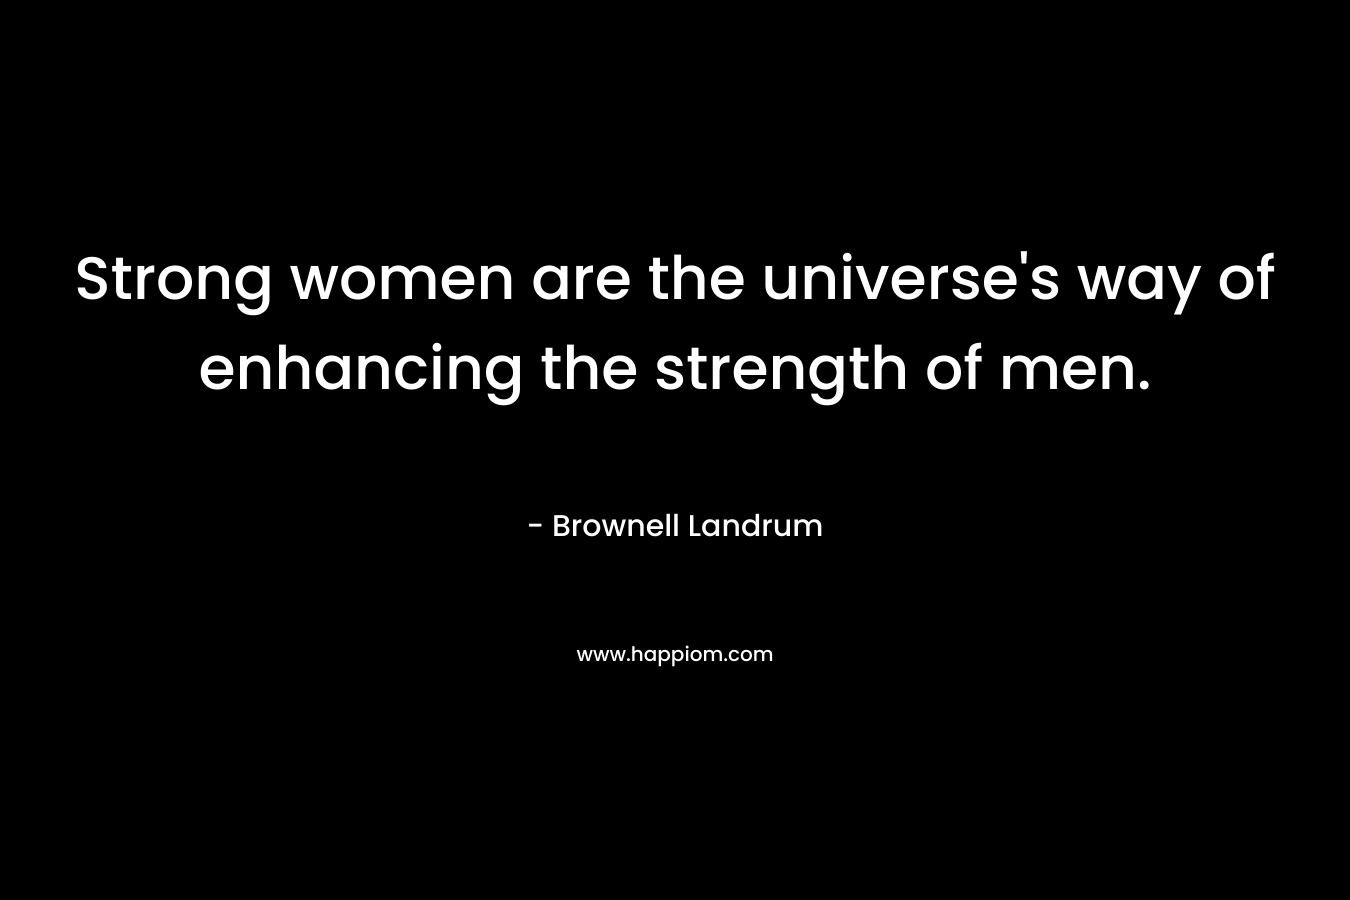 Strong women are the universe's way of enhancing the strength of men.